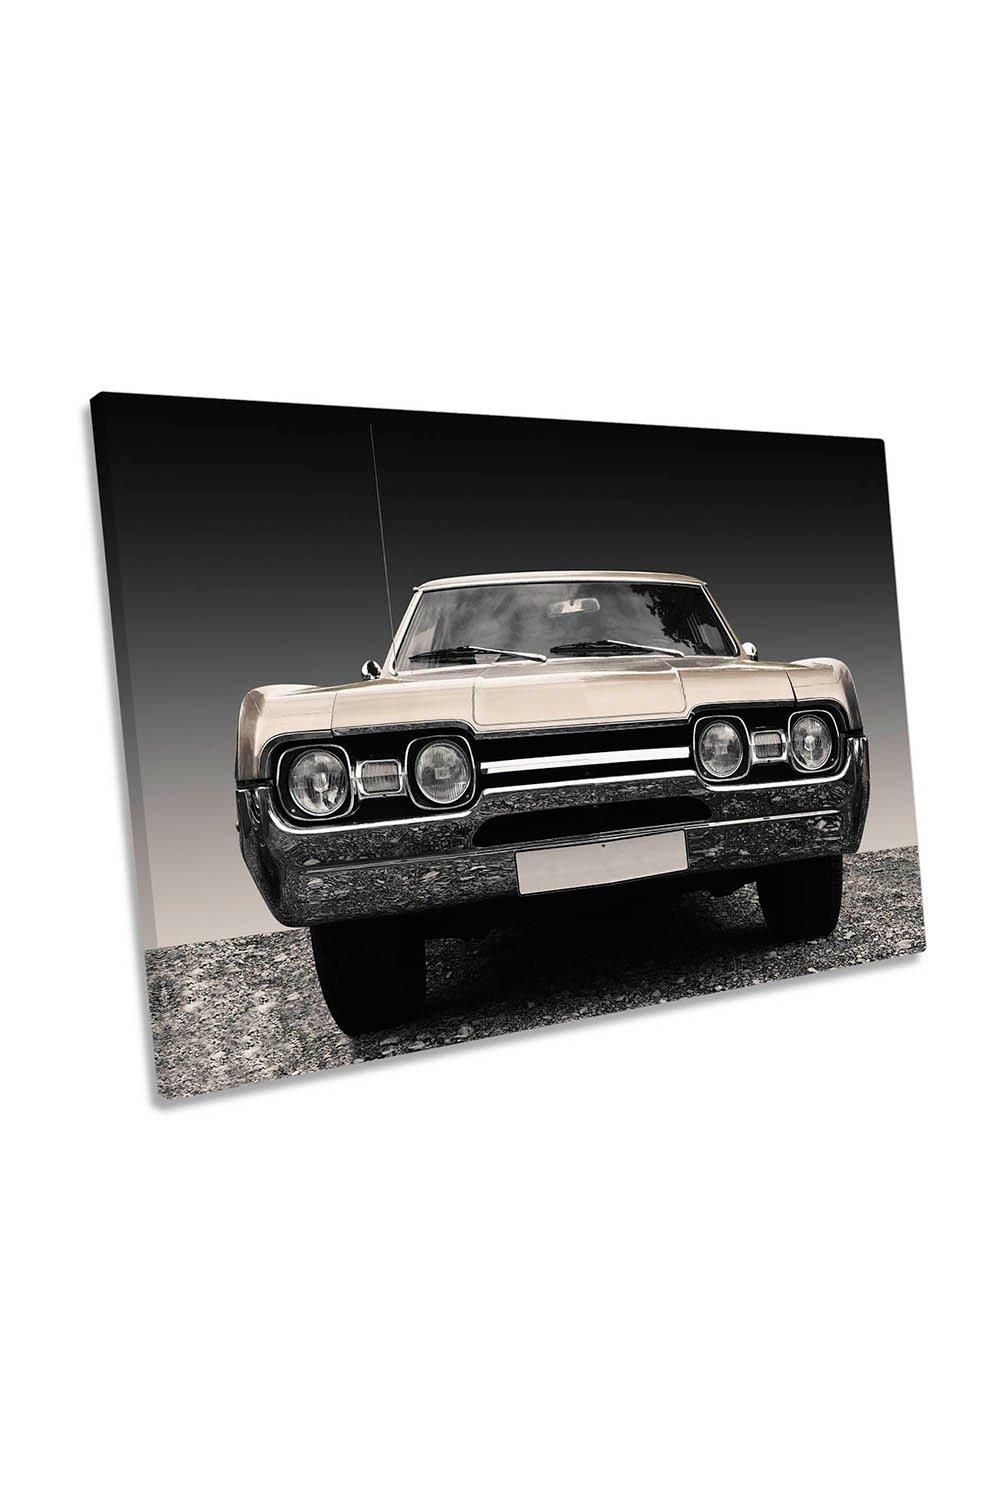 US Classic Car 1967 Cutlass Supreme Sports Coupe Canvas Wall Art Picture Print